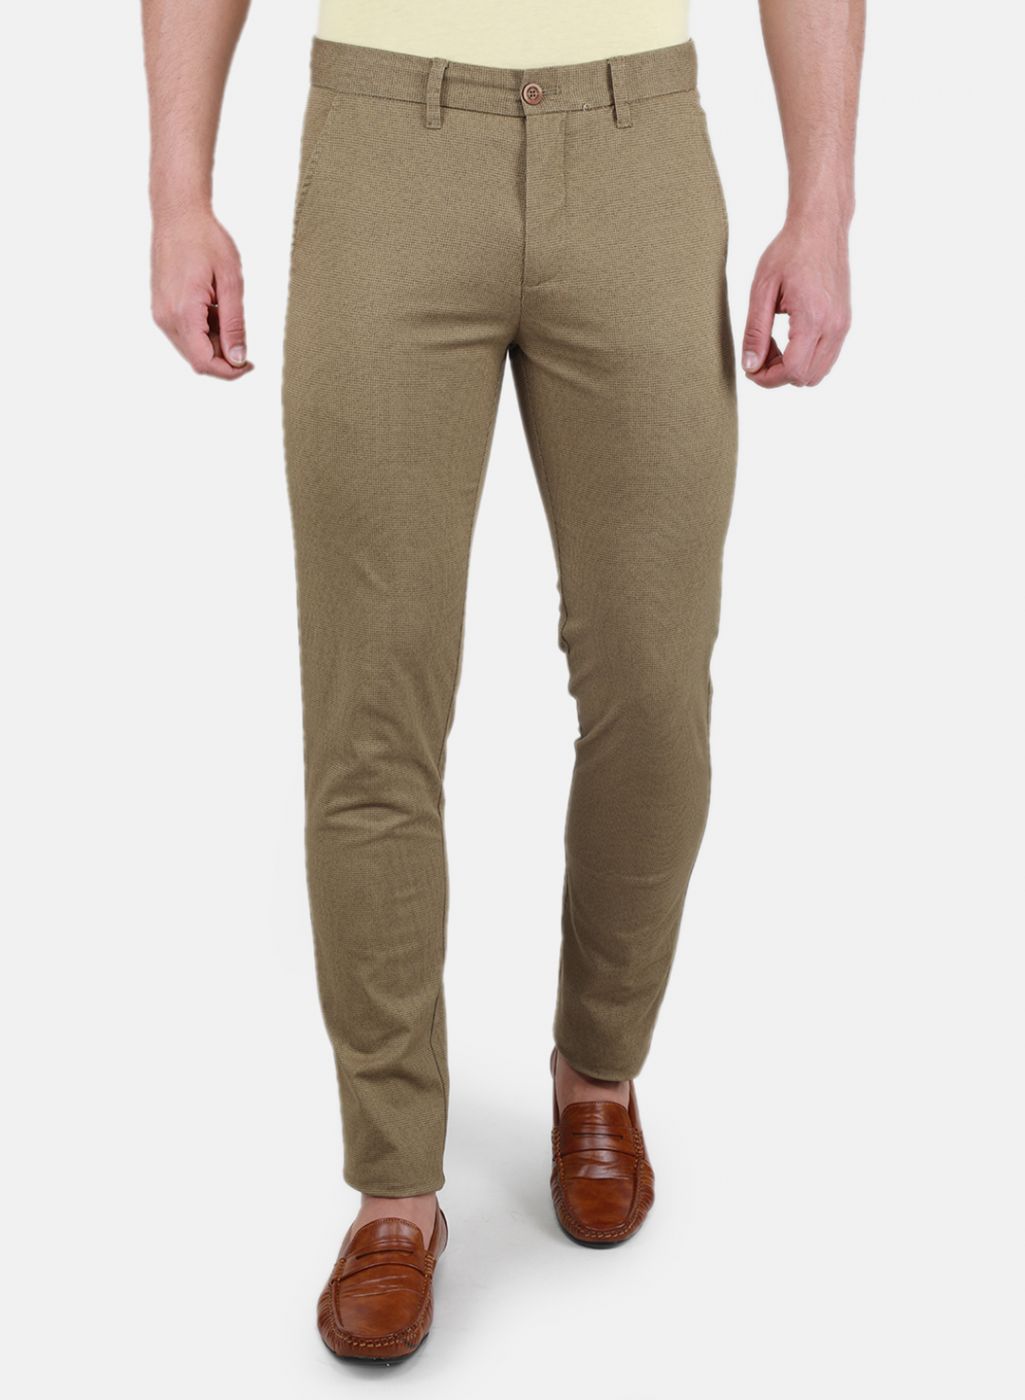 Mens 100% Cotton Pant at Latest Price in Ludhiana - Manufacturer